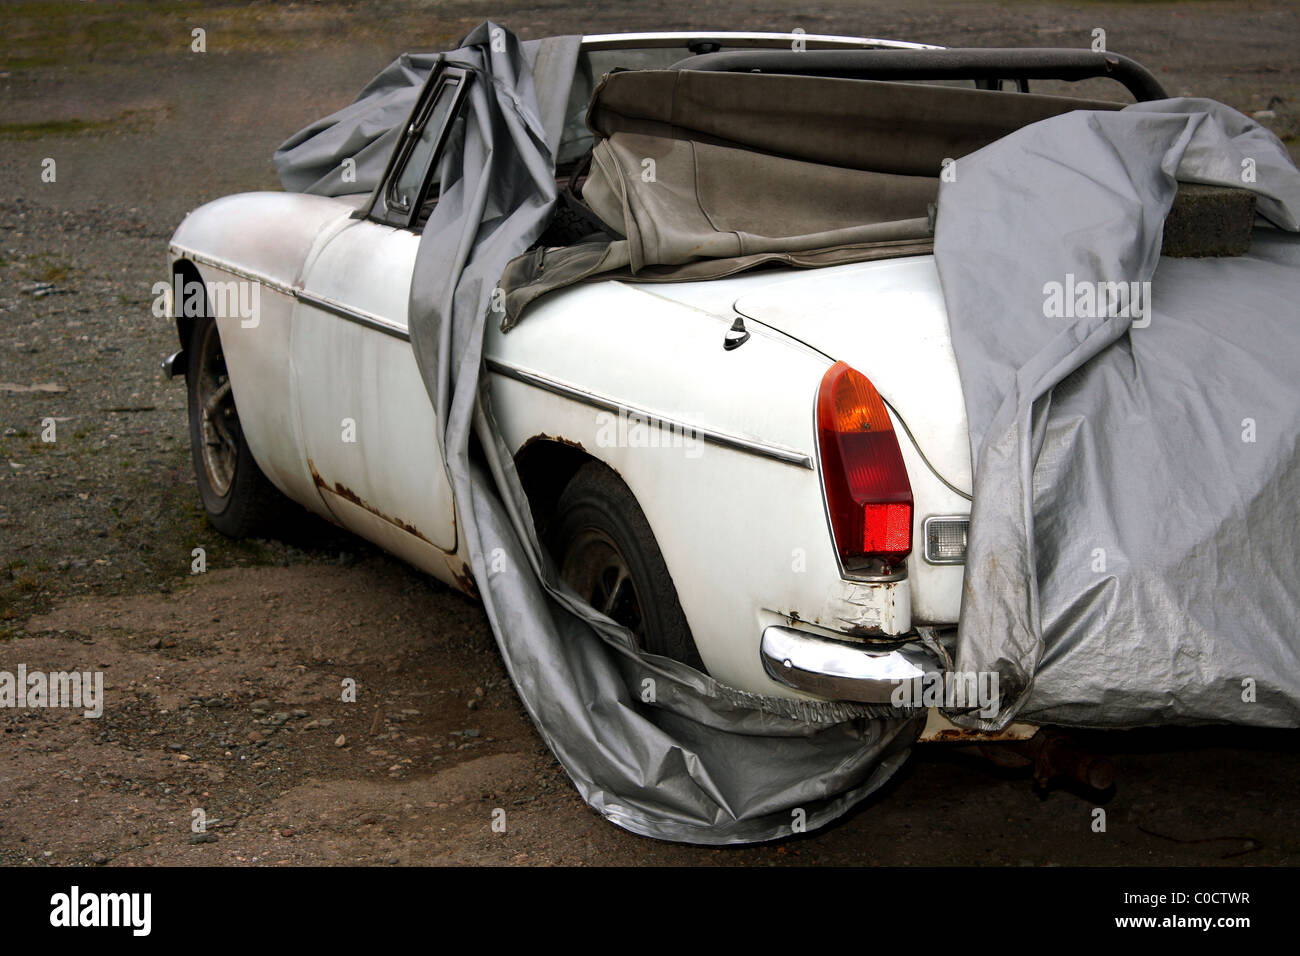 An old classic MG white car covered up and ready to be repaired as a restoration project Stock Photo